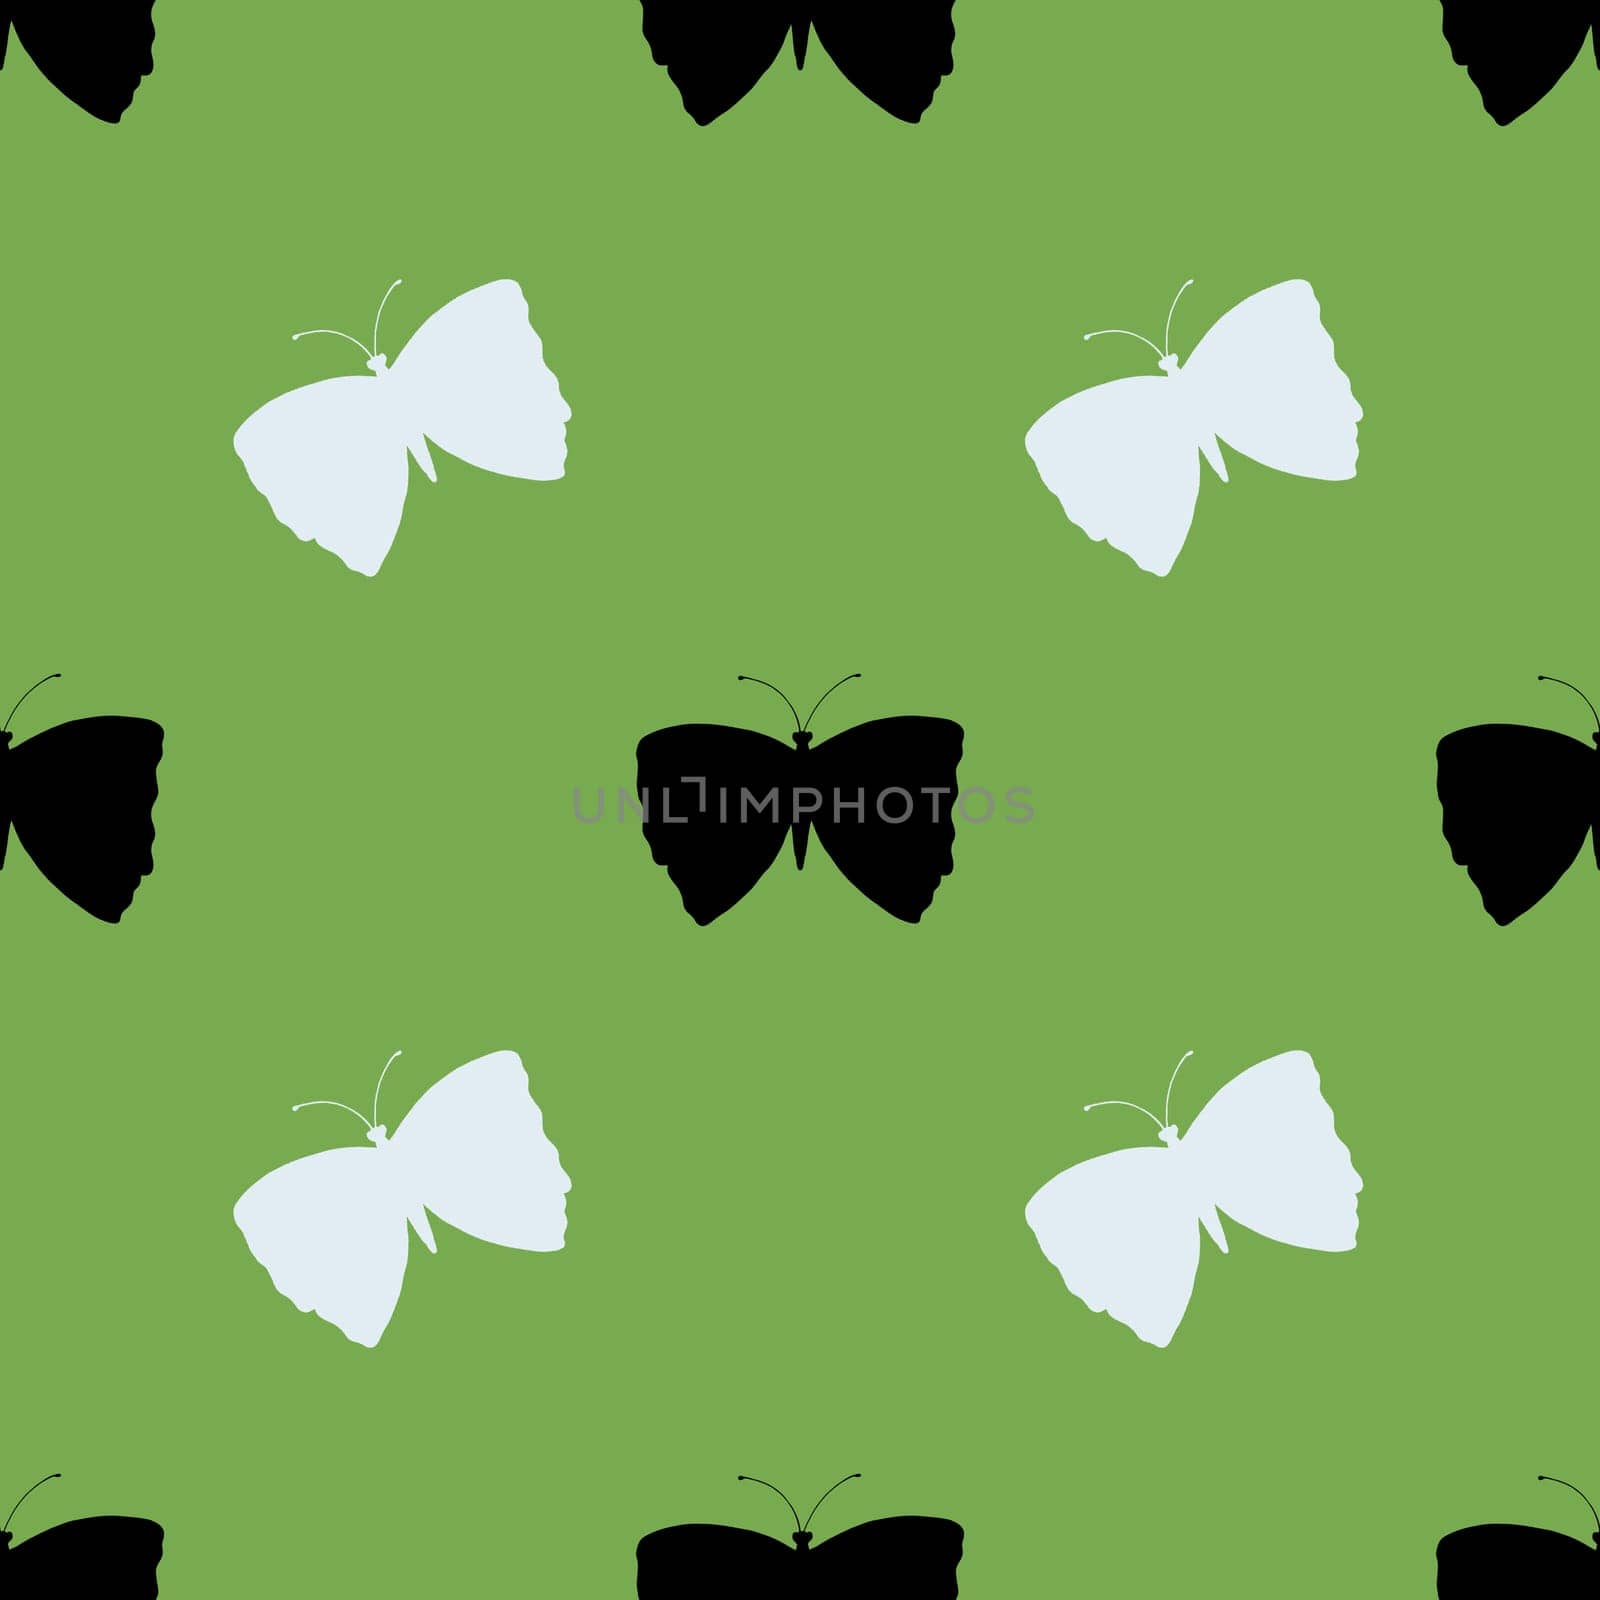 Black and White Butterfly Silhouette Seamless Repeat Pattern Background. Butterfly Silhouettes on Green Digital Paper.